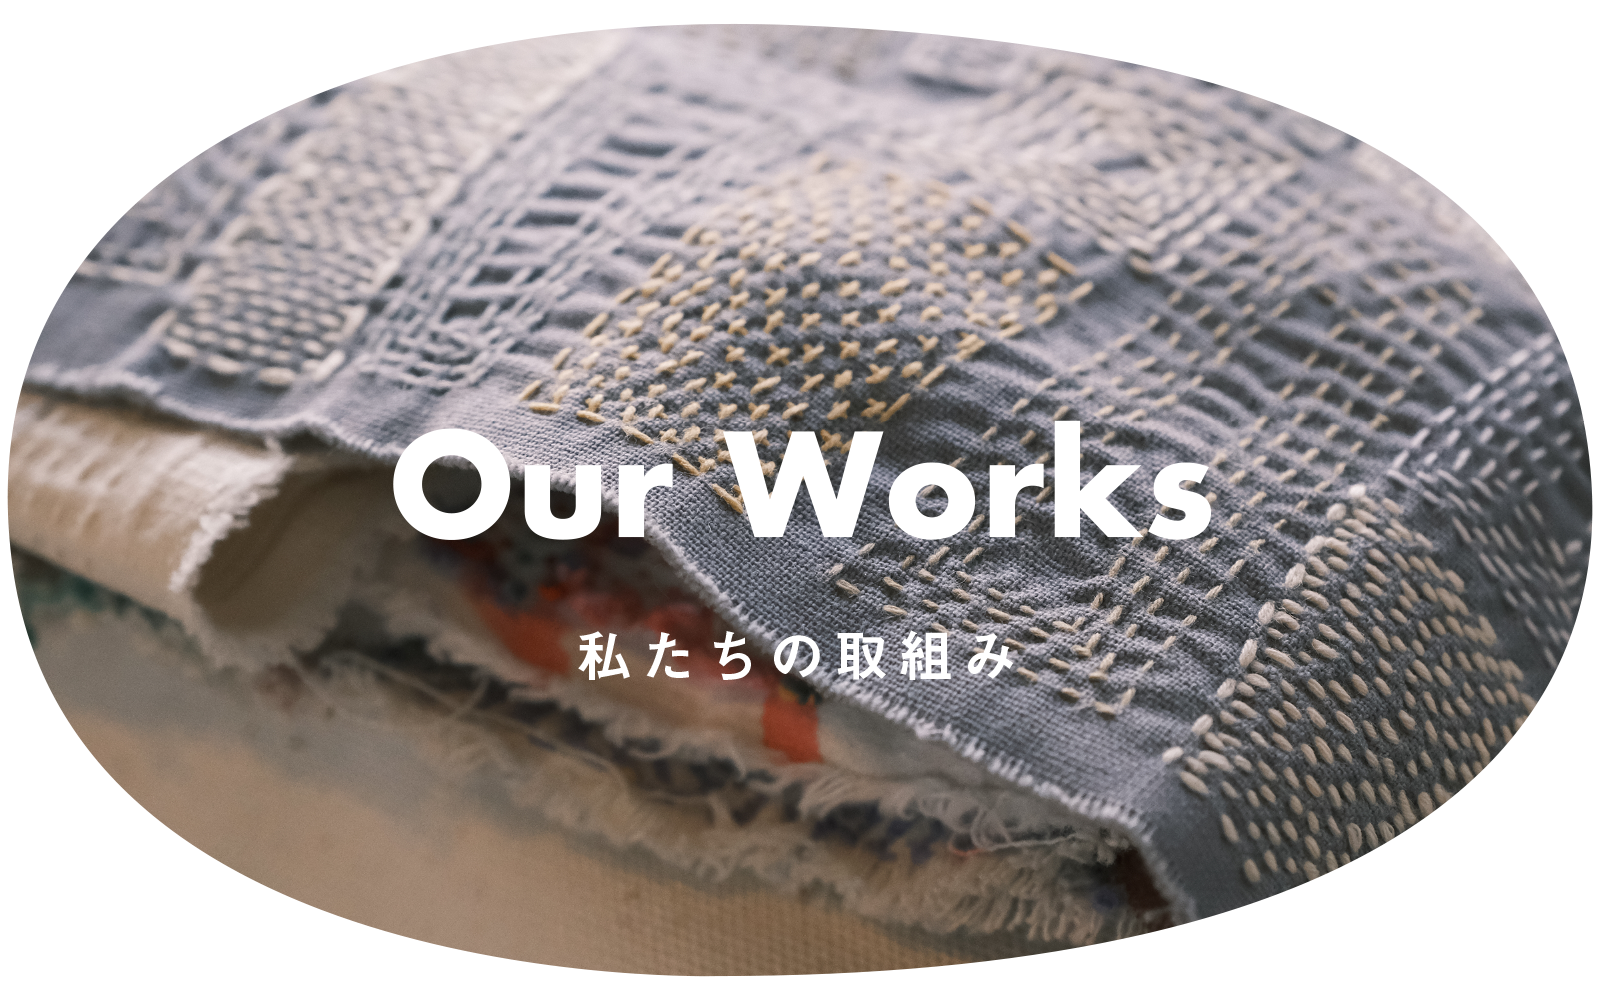 Our Works -私たちの取組み-